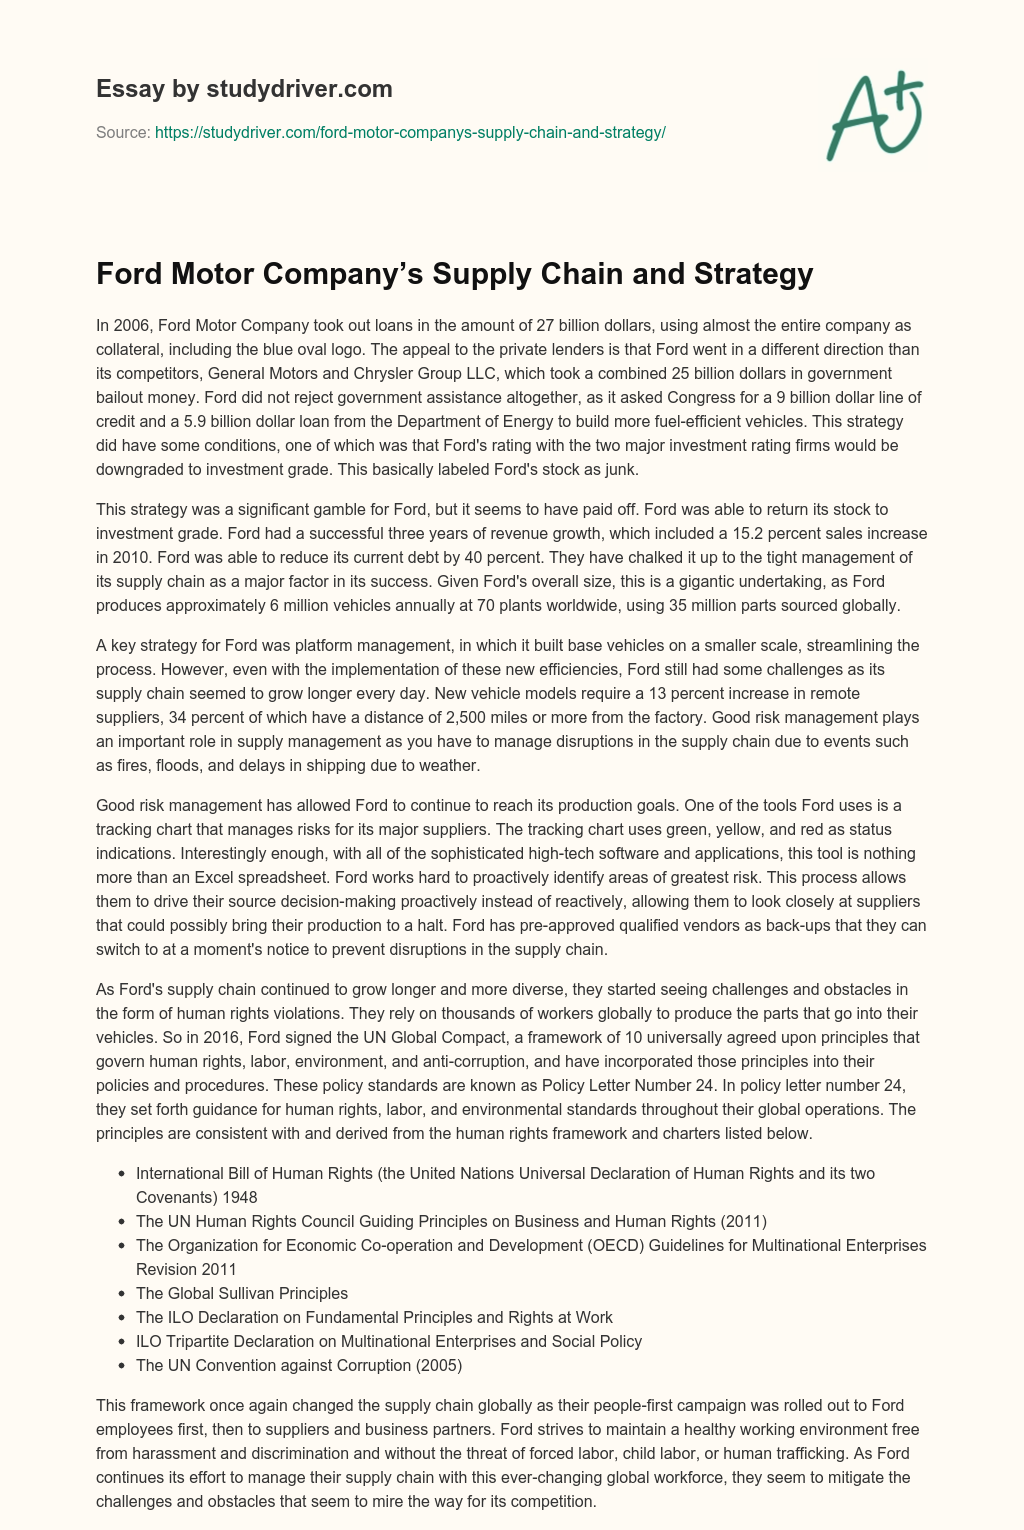 Ford Motor Company’s Supply Chain and Strategy essay